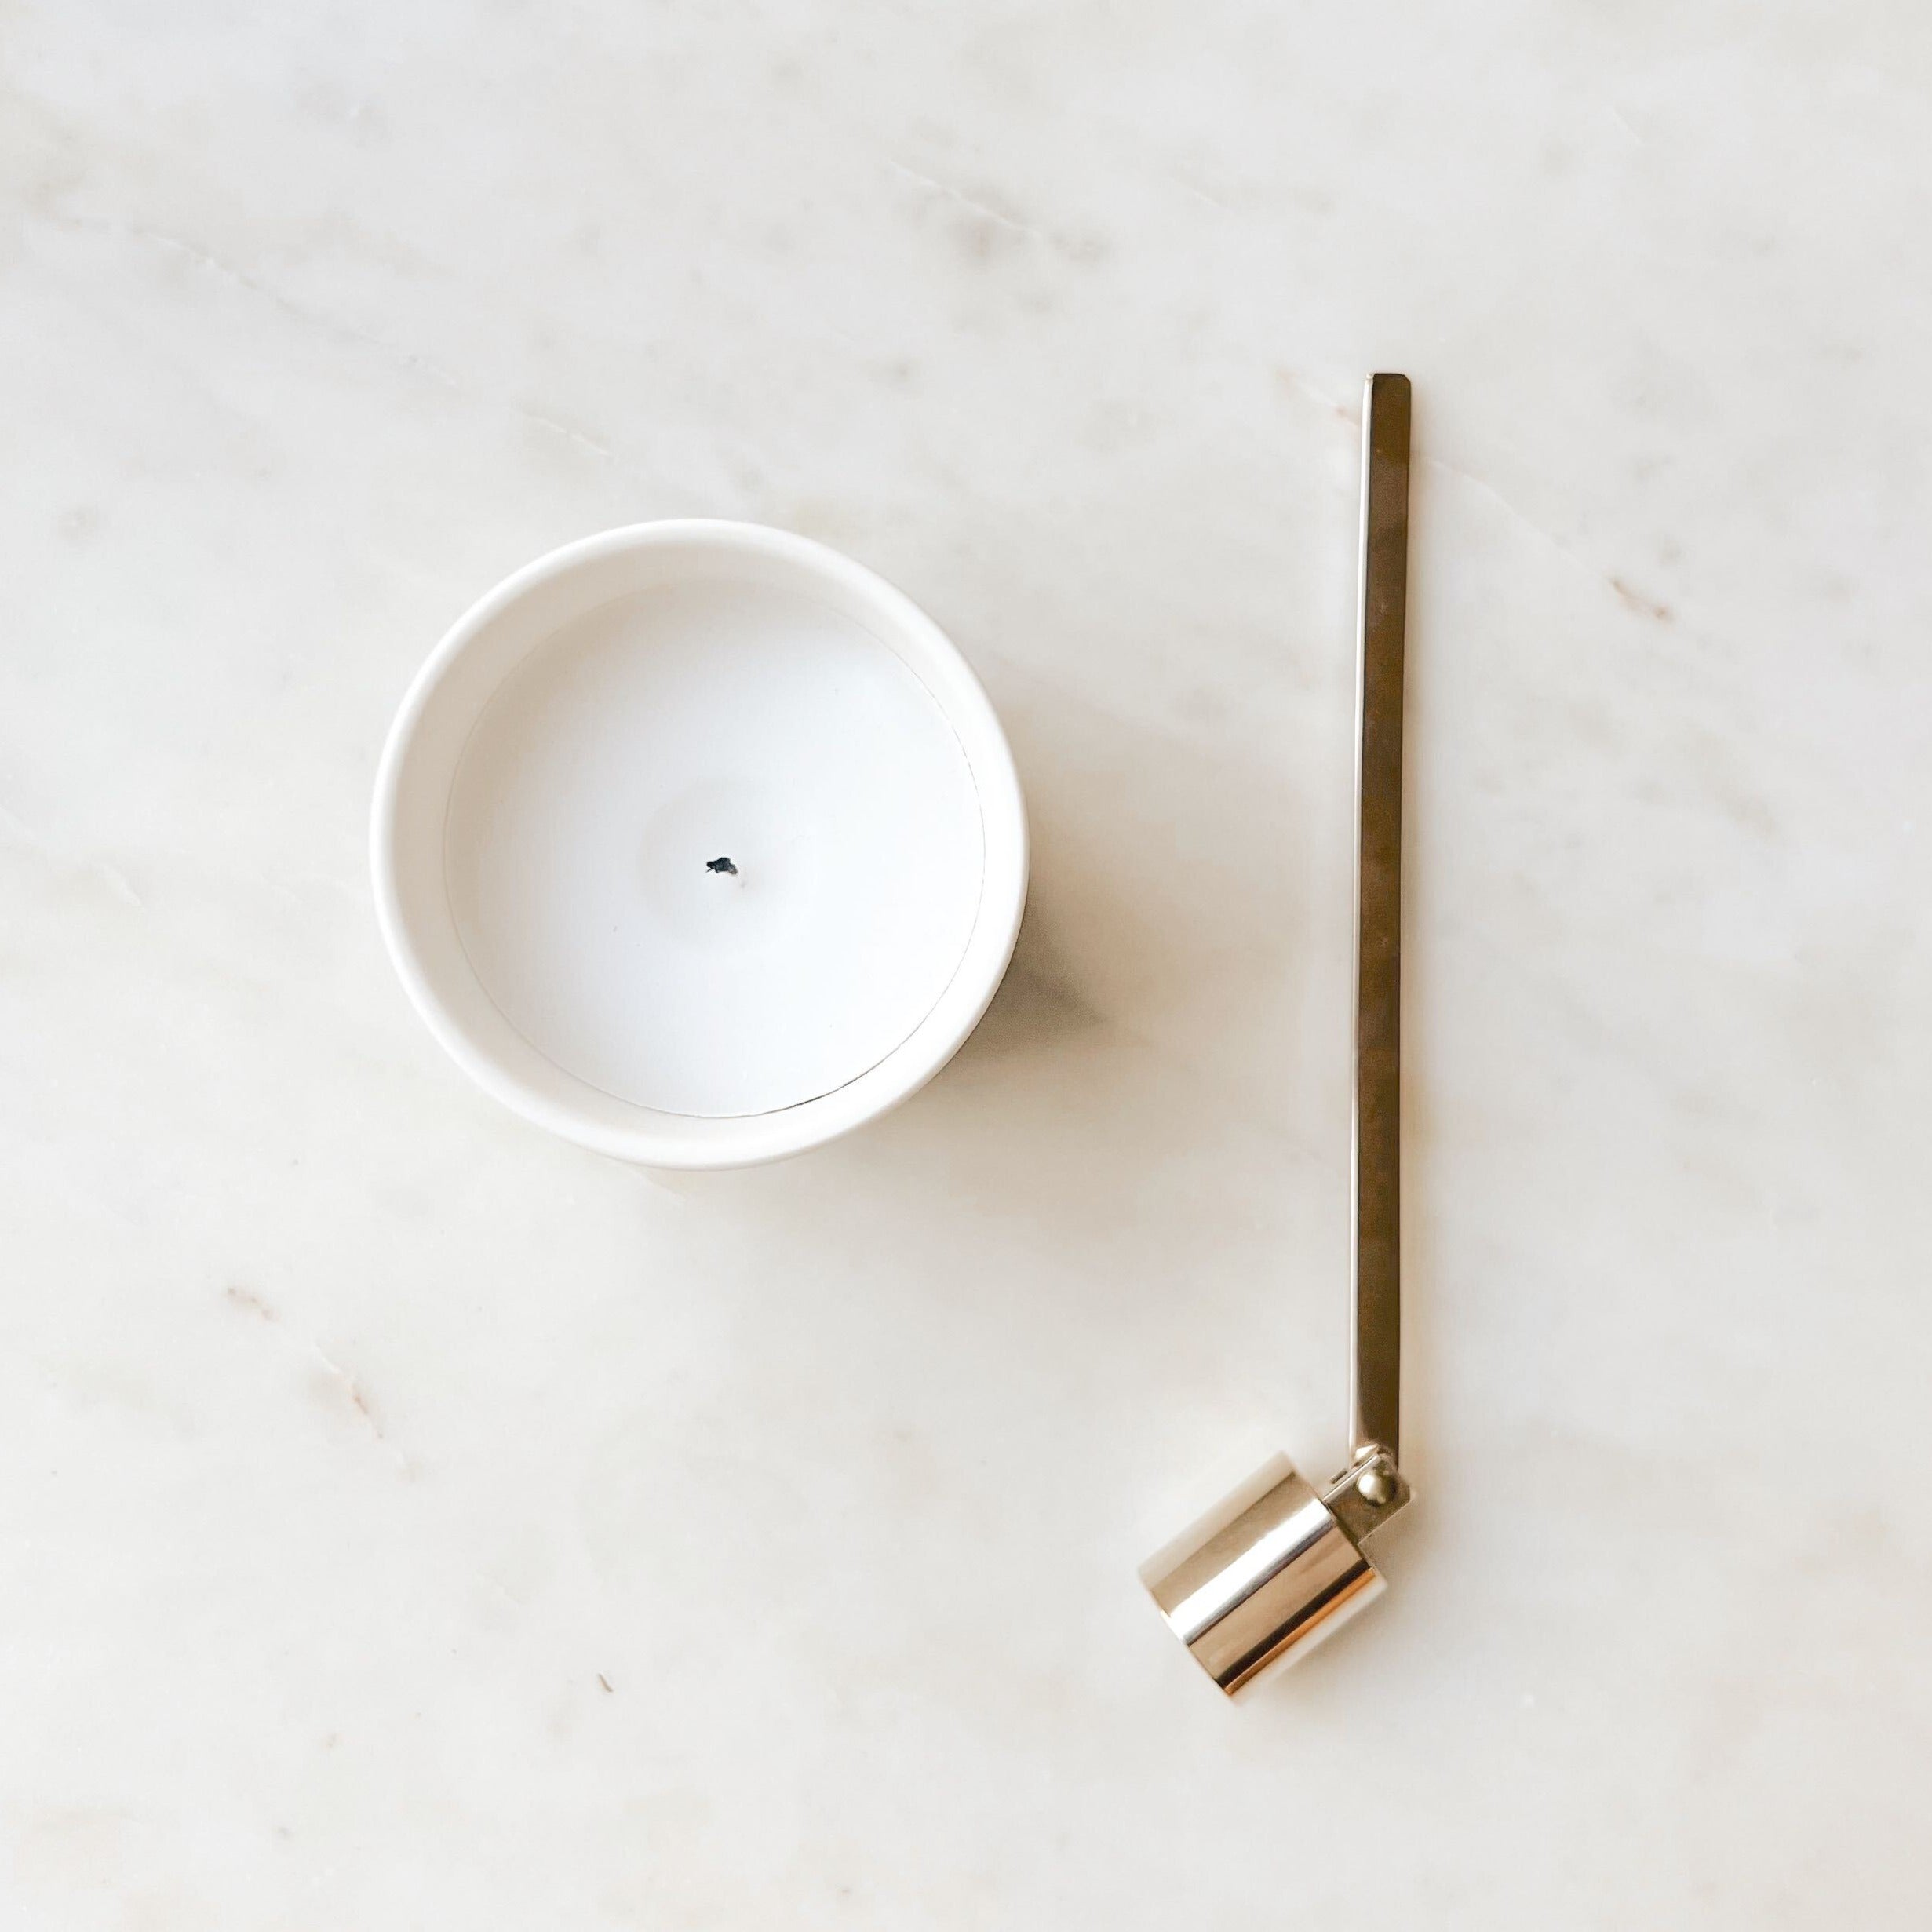 A gold candle snuffer laying next to a white Fiat Lux Copenhagen candle on a white marble table.